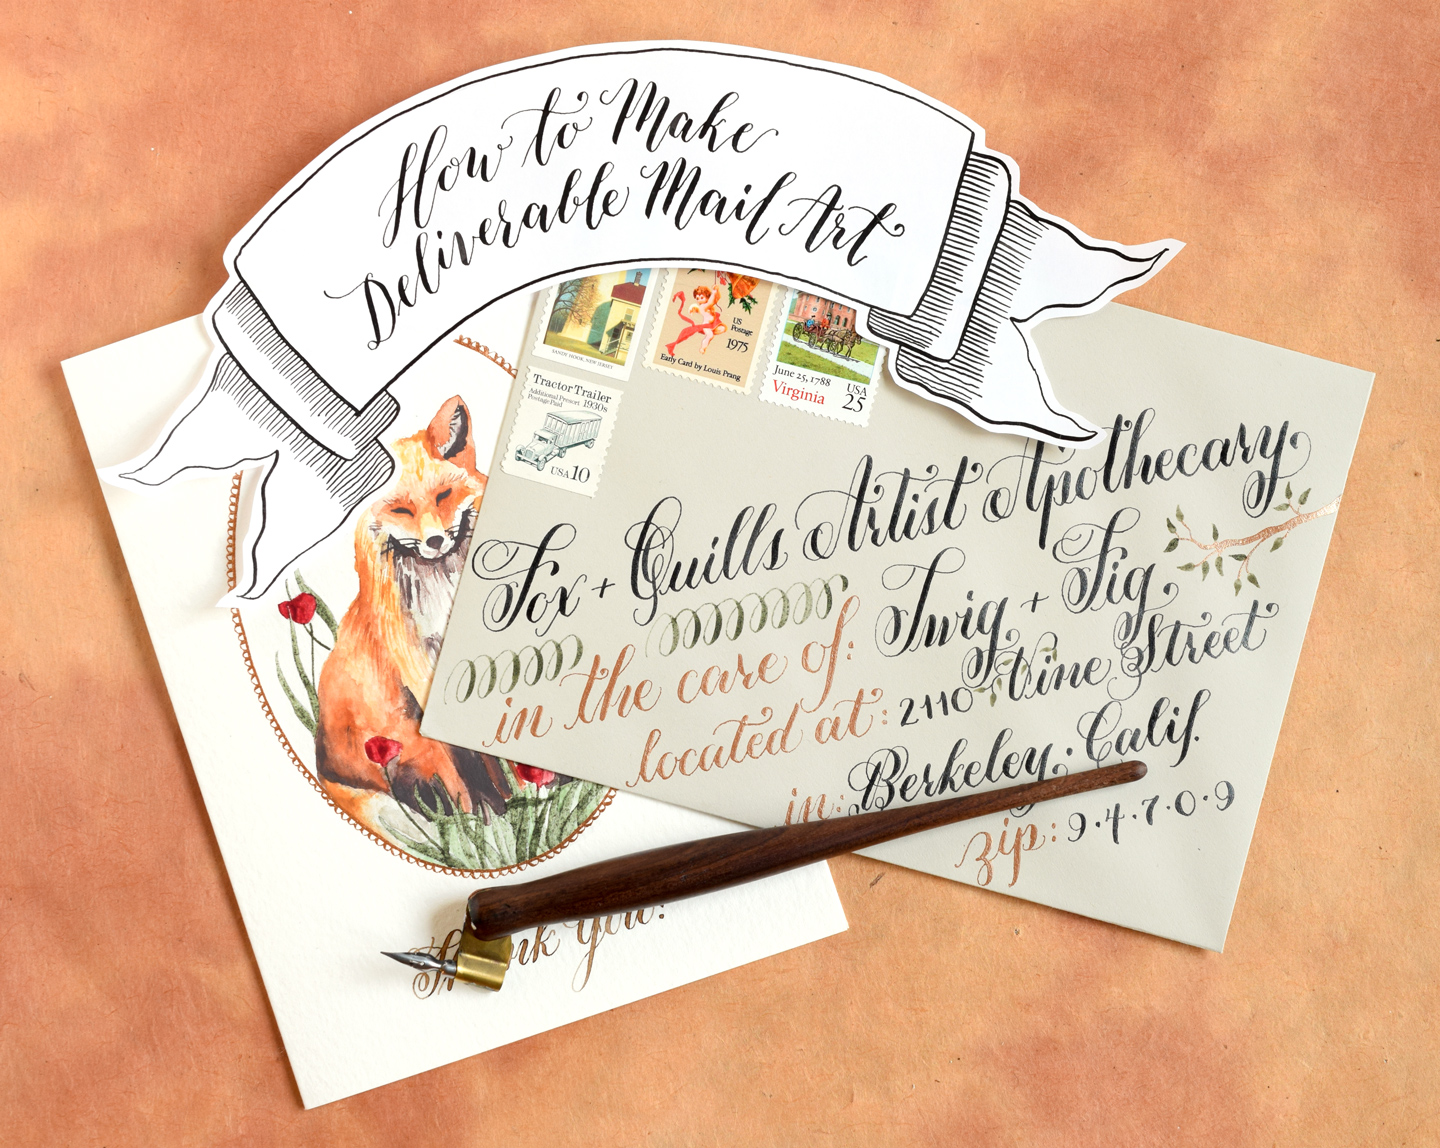 How to Make Deliverable Mail Art